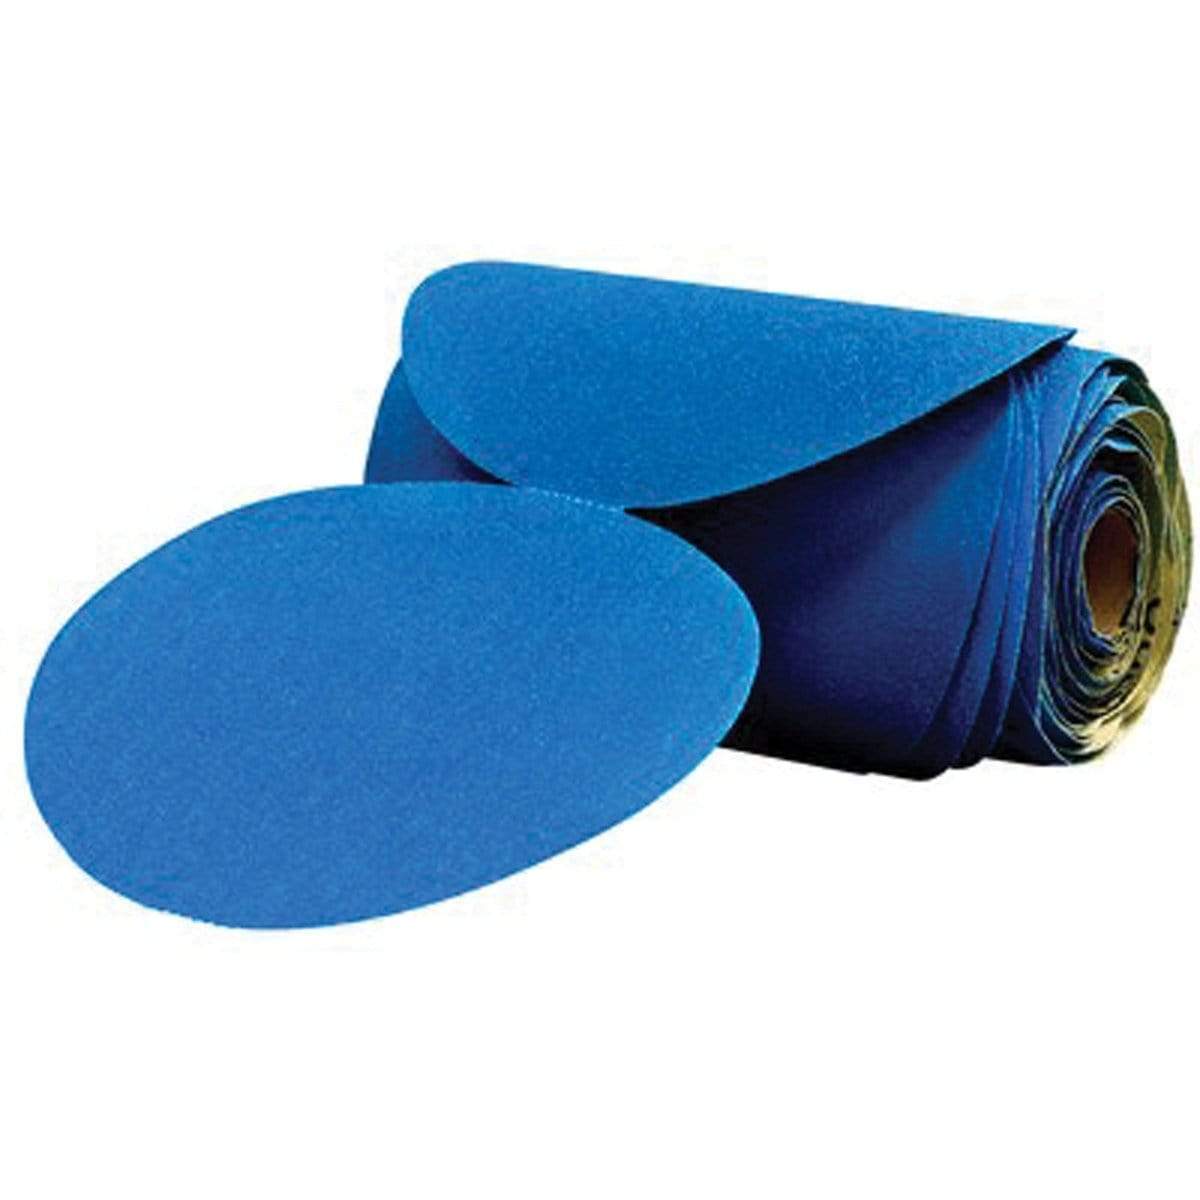 3M Marine Qualifies for Free Shipping 3M Stikit Blue Sandpaper 6" Disc 150 100/Roll #36205